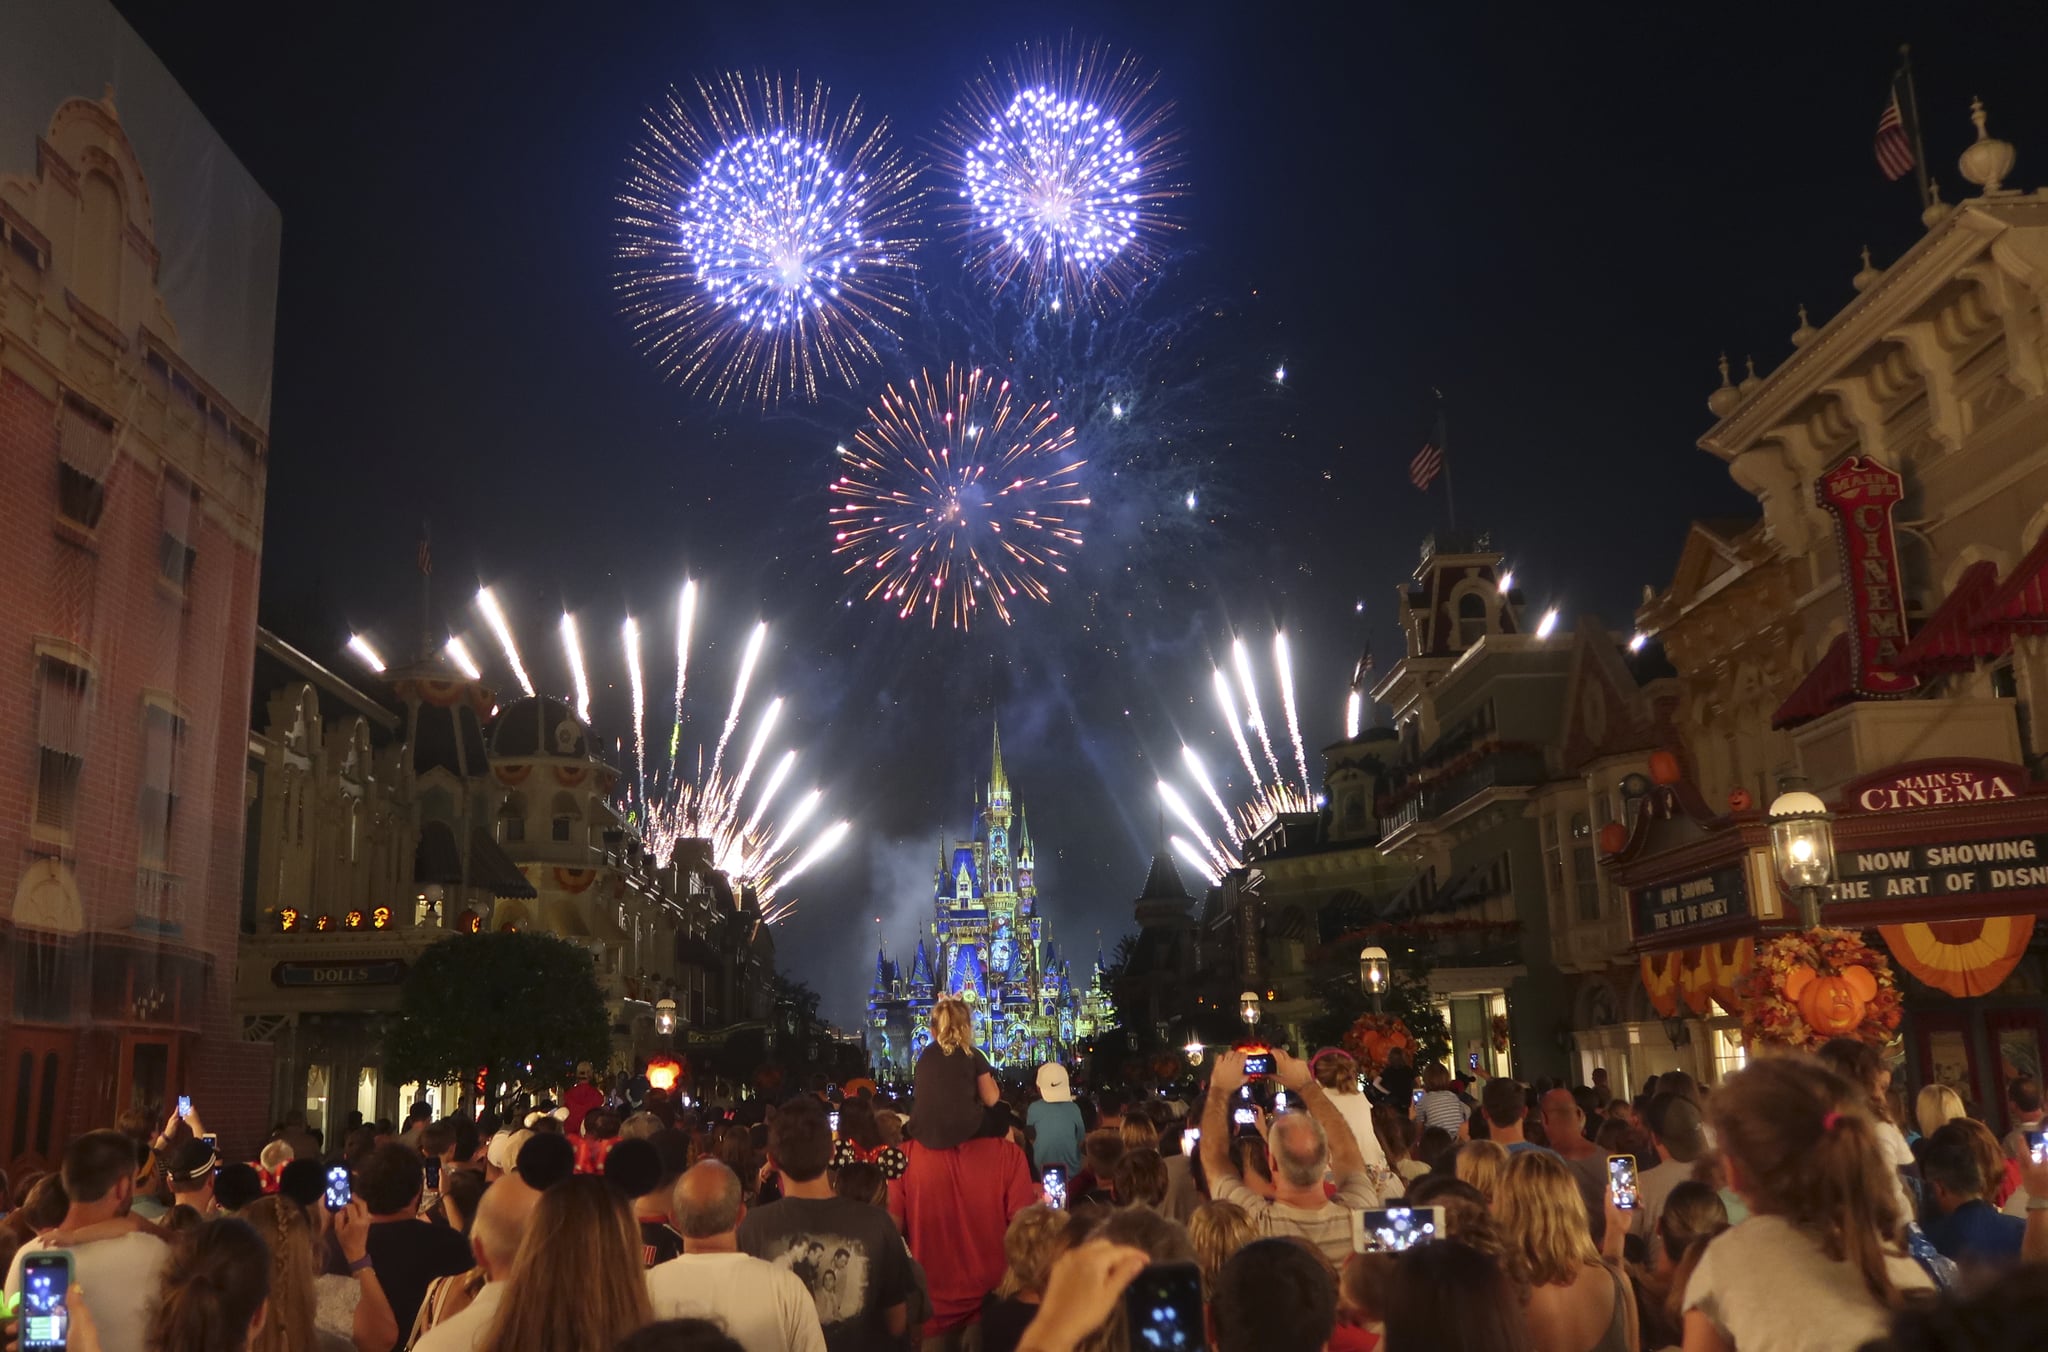 LAKE BUENA VISTA, FL - OCTOBER 10: Fireworks explode over Cinderella Castle during the Happily Ever After fireworks show at the Walt Disney World, Magic Kingdom entertainment park on October 10, 2018 in Lake Buena Vista, Florida. (Photo by Gary Hershorn/Getty Images)